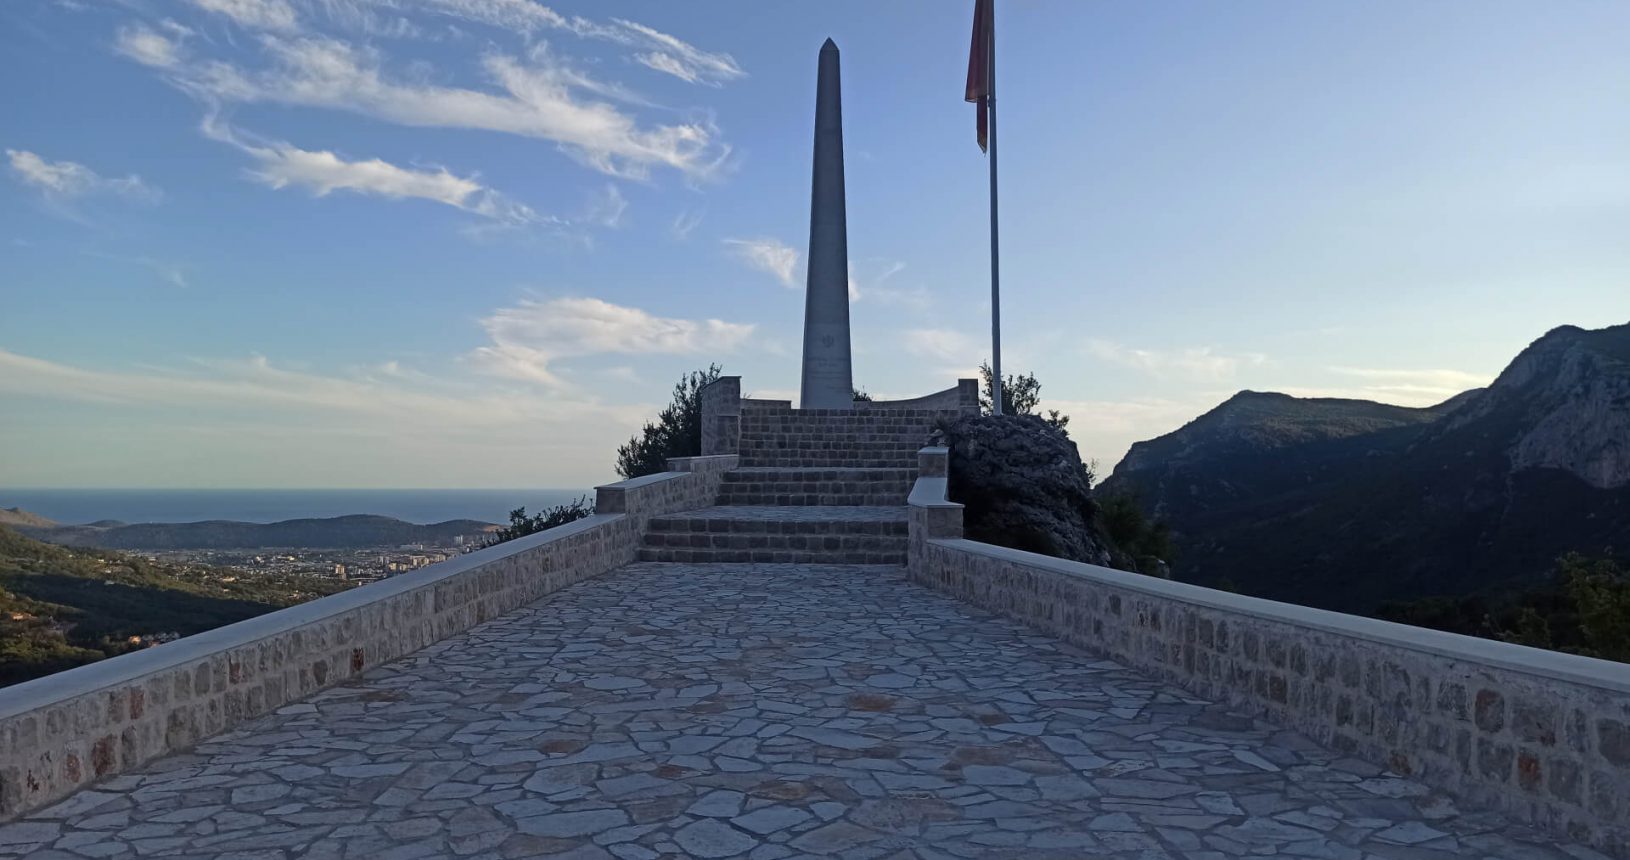 The trail to the Monument to the Battle of Tudemil